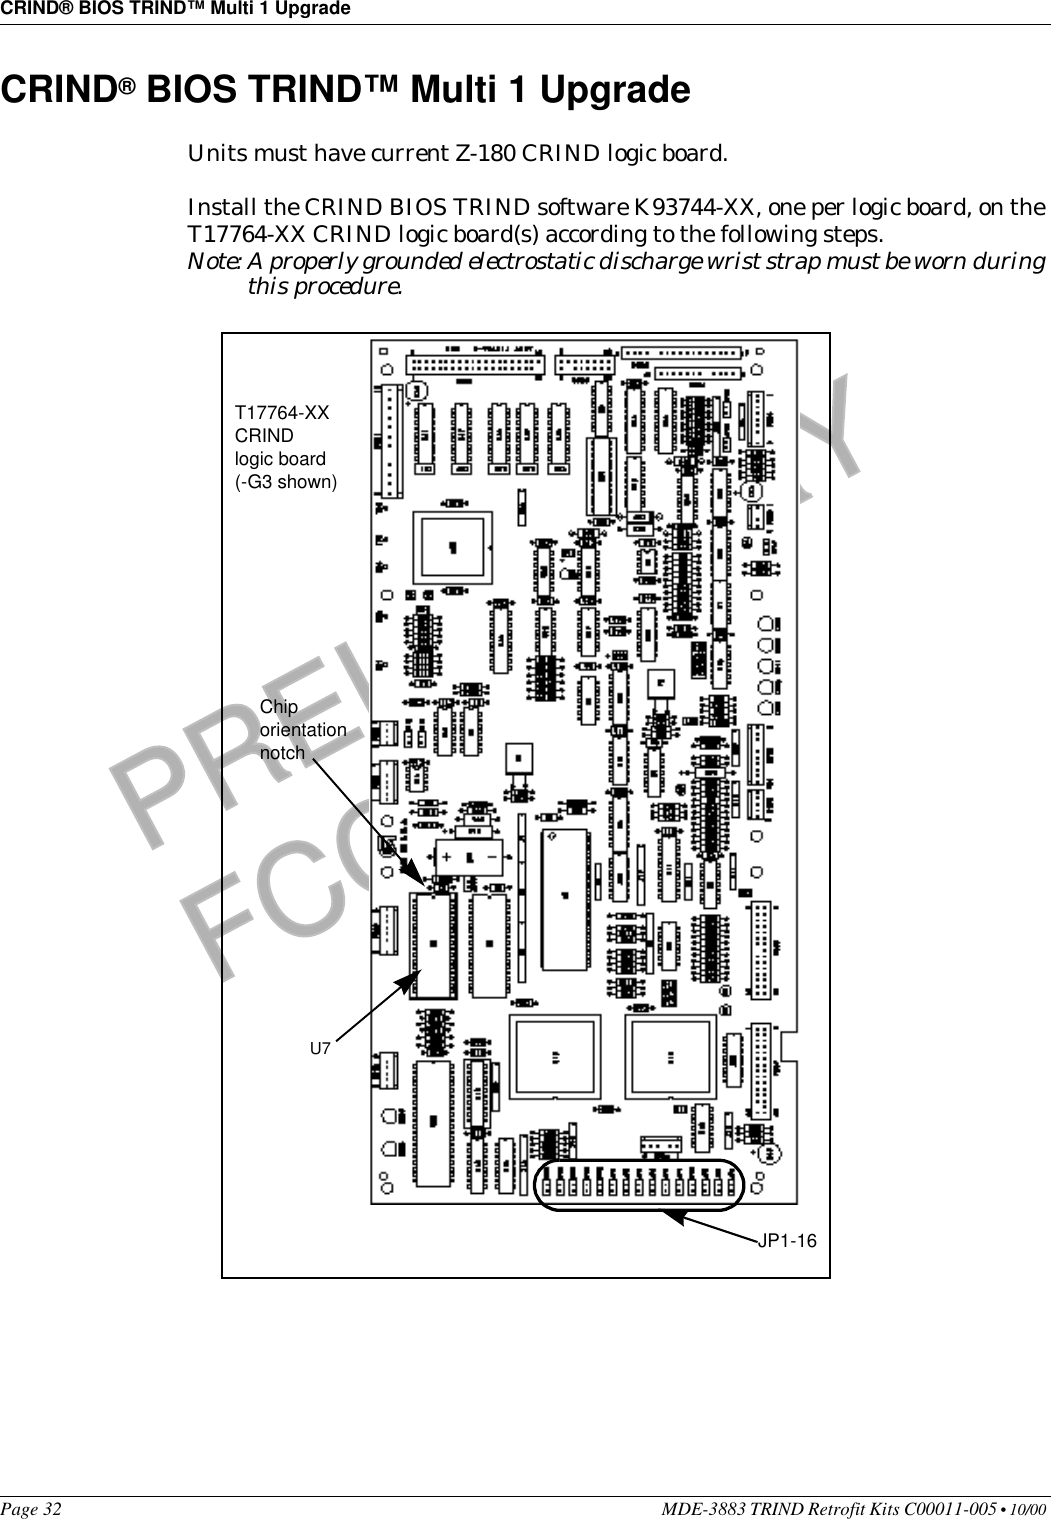 CRIND® BIOS TRIND™ Multi 1 UpgradePage 32 MDE-3883 TRIND Retrofit Kits C00011-005 • 10/00 PRELIMINARYFCC 11/30CRIND® BIOS TRIND™ Multi 1 UpgradeUnits must have current Z-180 CRIND logic board. Install the CRIND BIOS TRIND software K93744-XX, one per logic board, on the T17764-XX CRIND logic board(s) according to the following steps.Note: A properly grounded electrostatic discharge wrist strap must be worn during this procedure. U7 Chip orientation notchT17764-XX CRIND logic board (-G3 shown)JP1-16